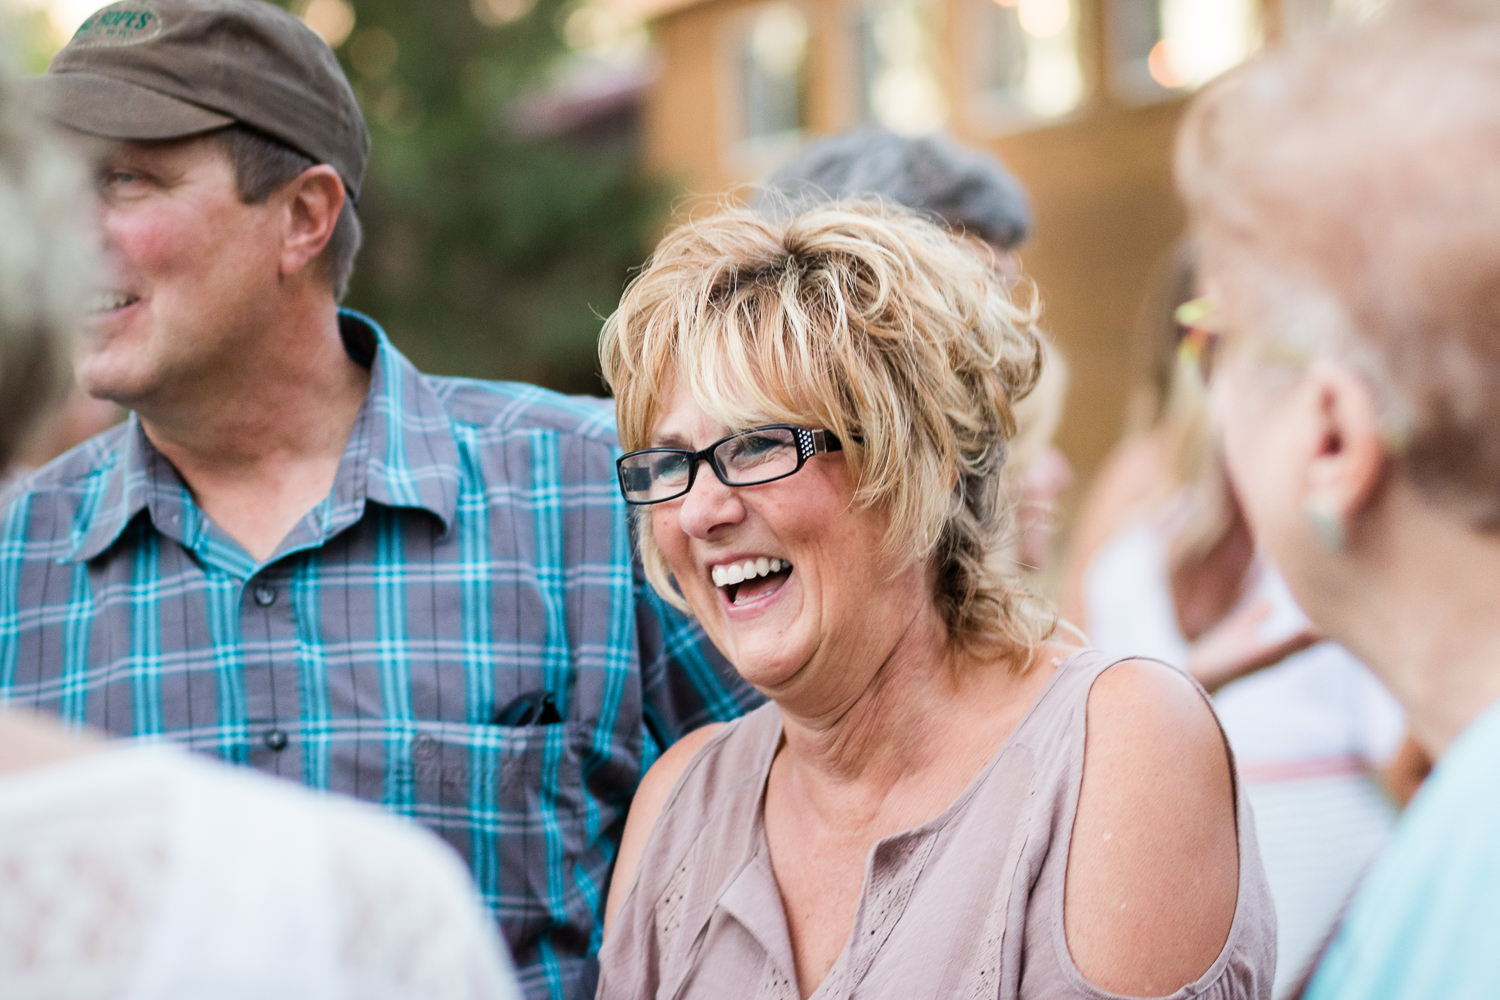 billings-montana-swift-river-ranch-wedding-reception-guests-laughing-outside.jpg